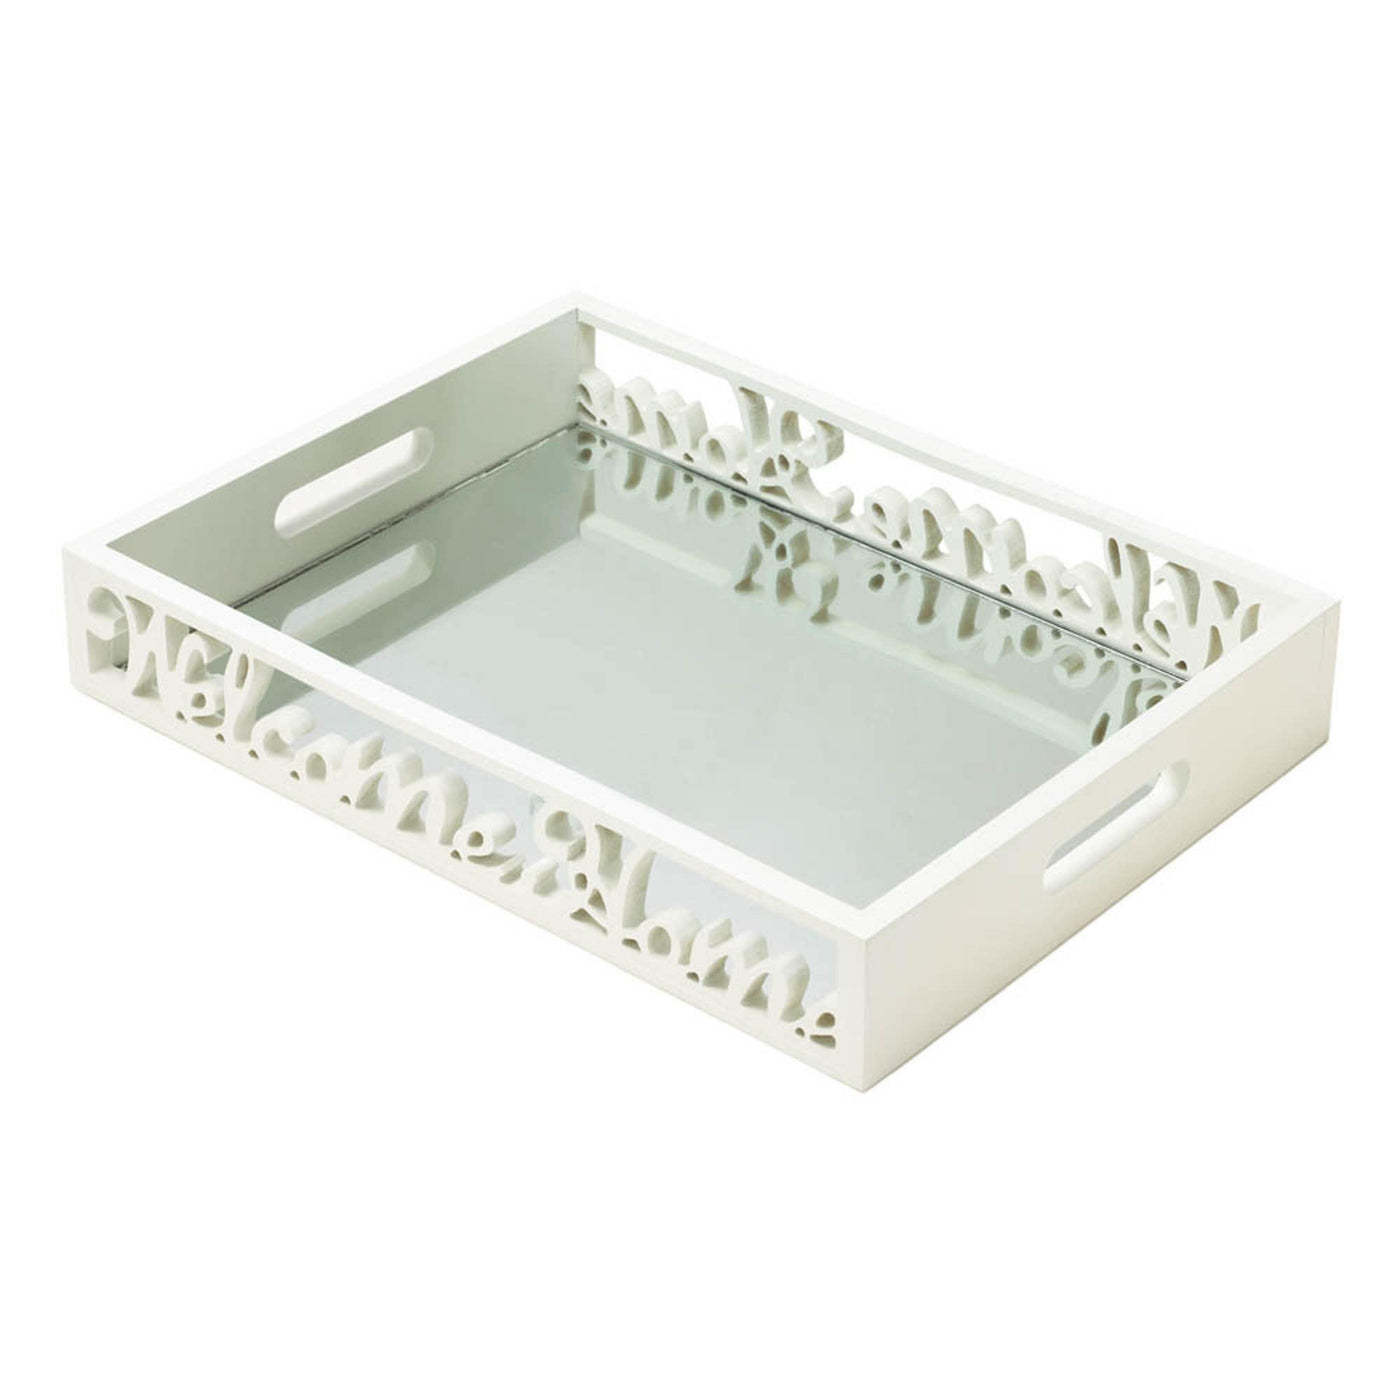 Primary image for Welcome Home Mirror Tray